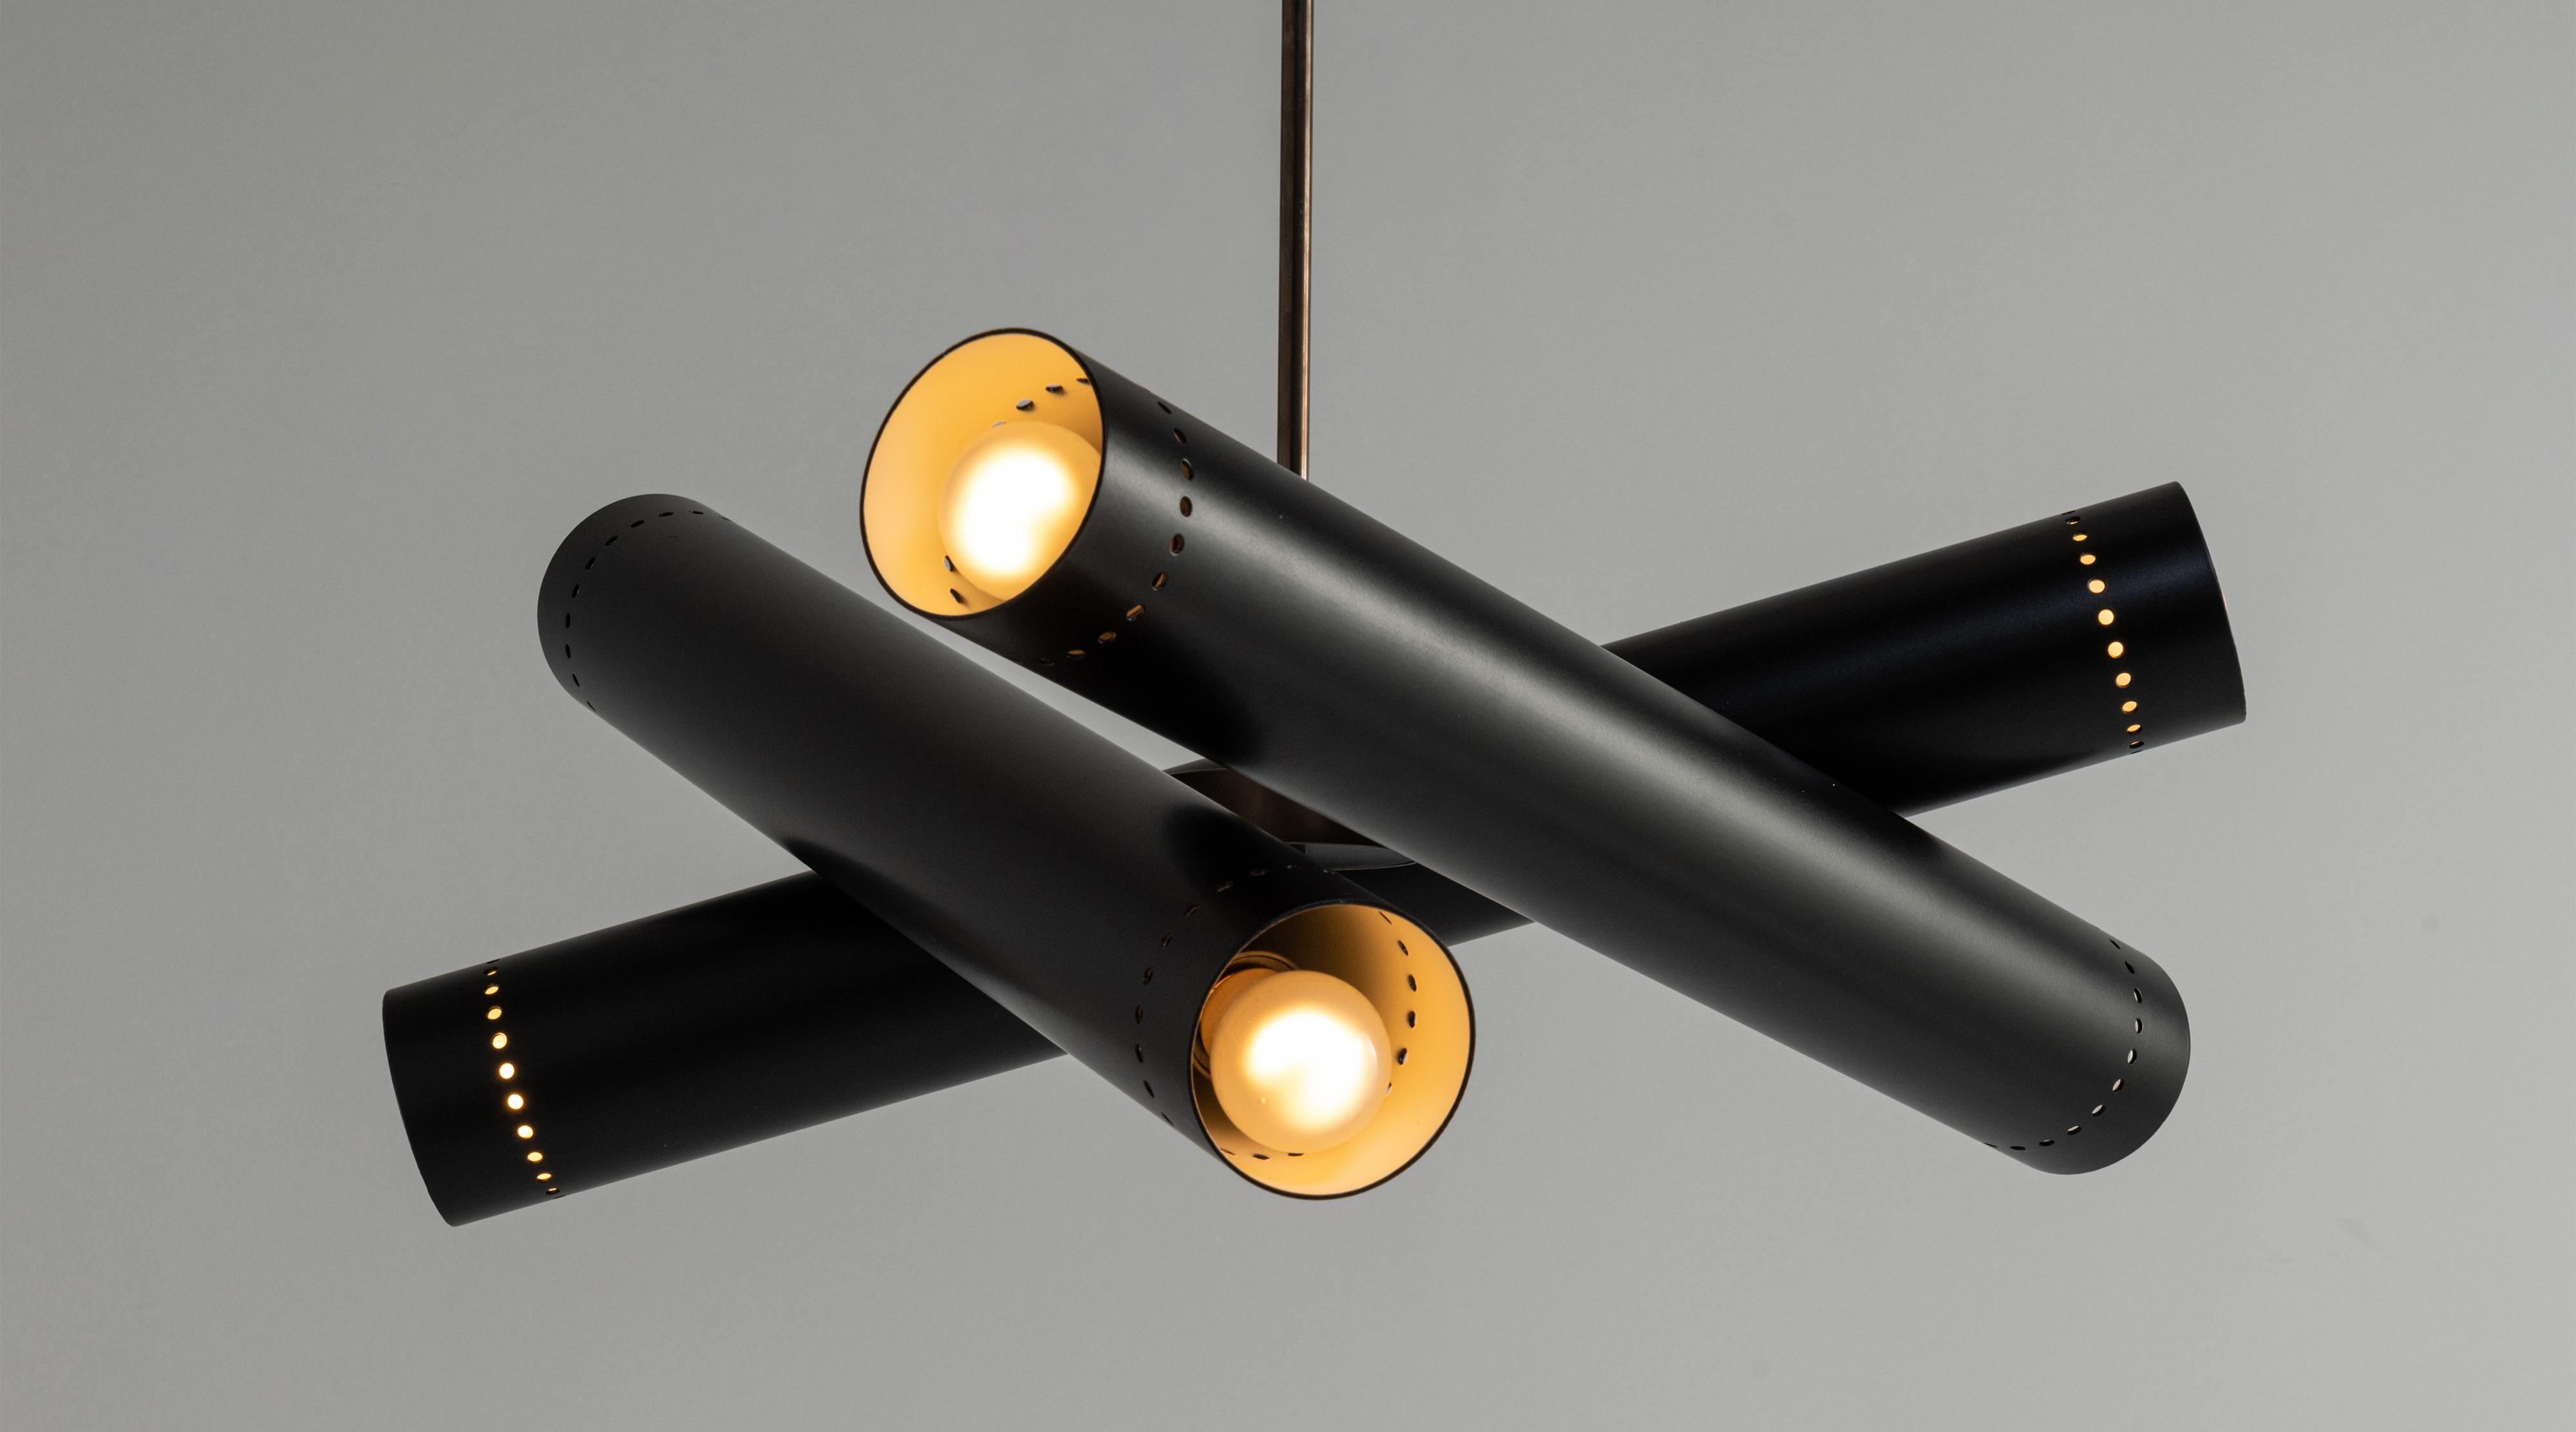 Black Metal & Brass Tubular Chandelier
Made in Italy
Series of black metal tubes with perforated detailing on brass rod.
23.75”dia x 32”h
Ref. L4263

*4-6 Week Lead Time*
*EU Wiring / Not UL Listed*
*3